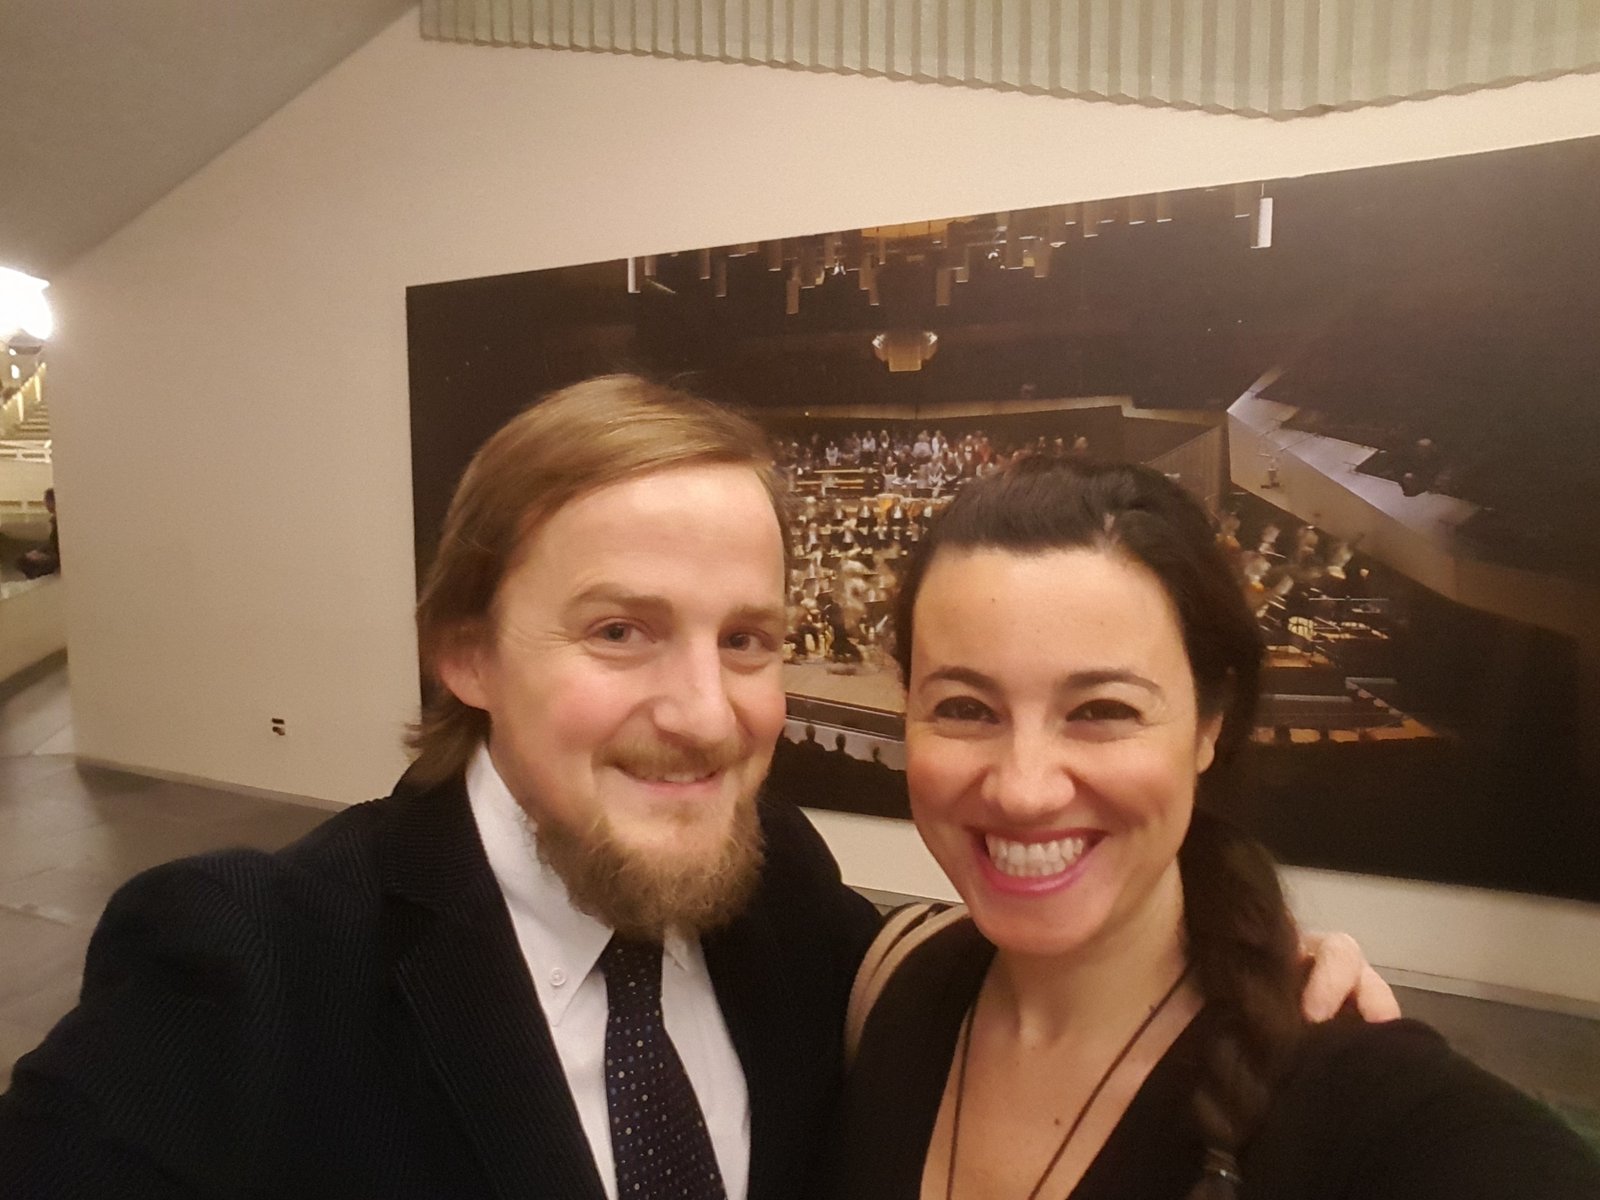 George and Mariacristina looking smart in front of a picture of the Berlin Philharmonic Orchestra